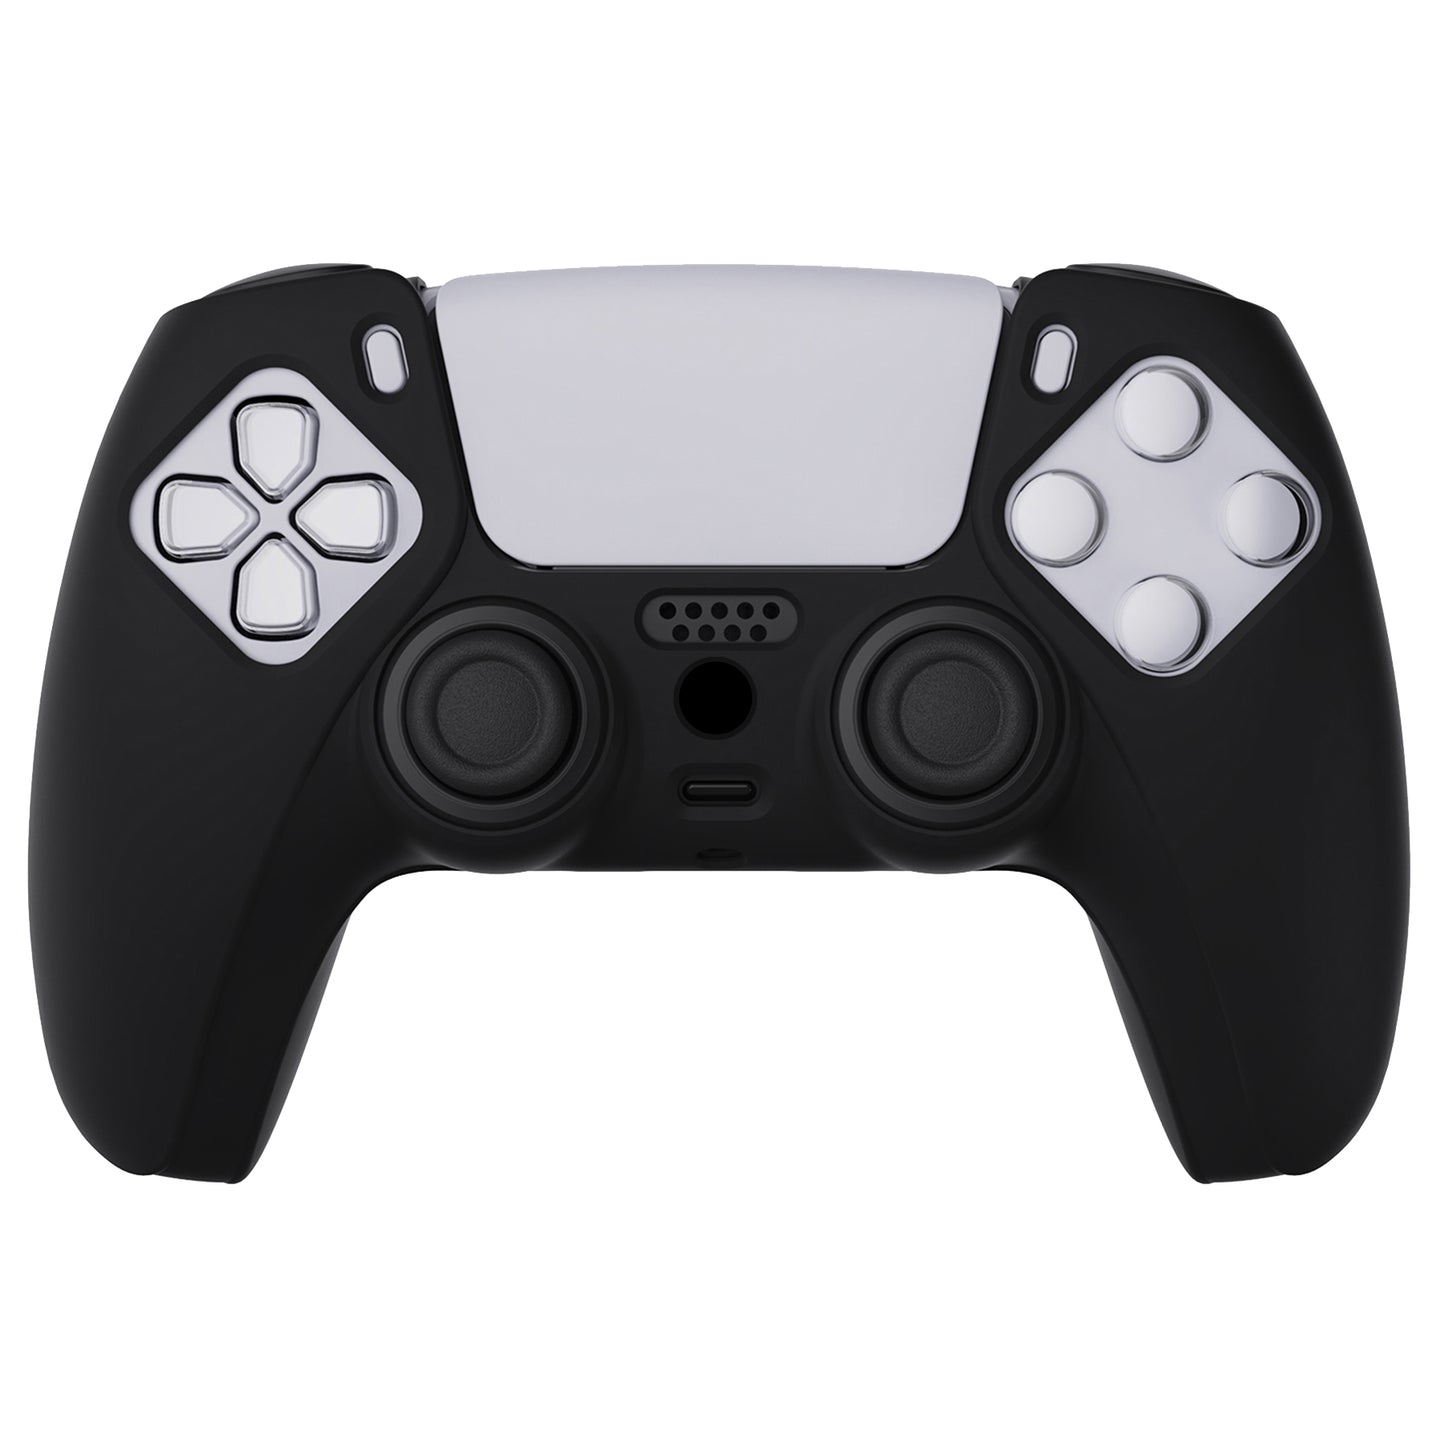 PlayVital Pure Series Anti-Slip Silicone Cover Skin with Thumb Grip Caps for PS5 Wireless Controller - Black - KOPF001 PlayVital